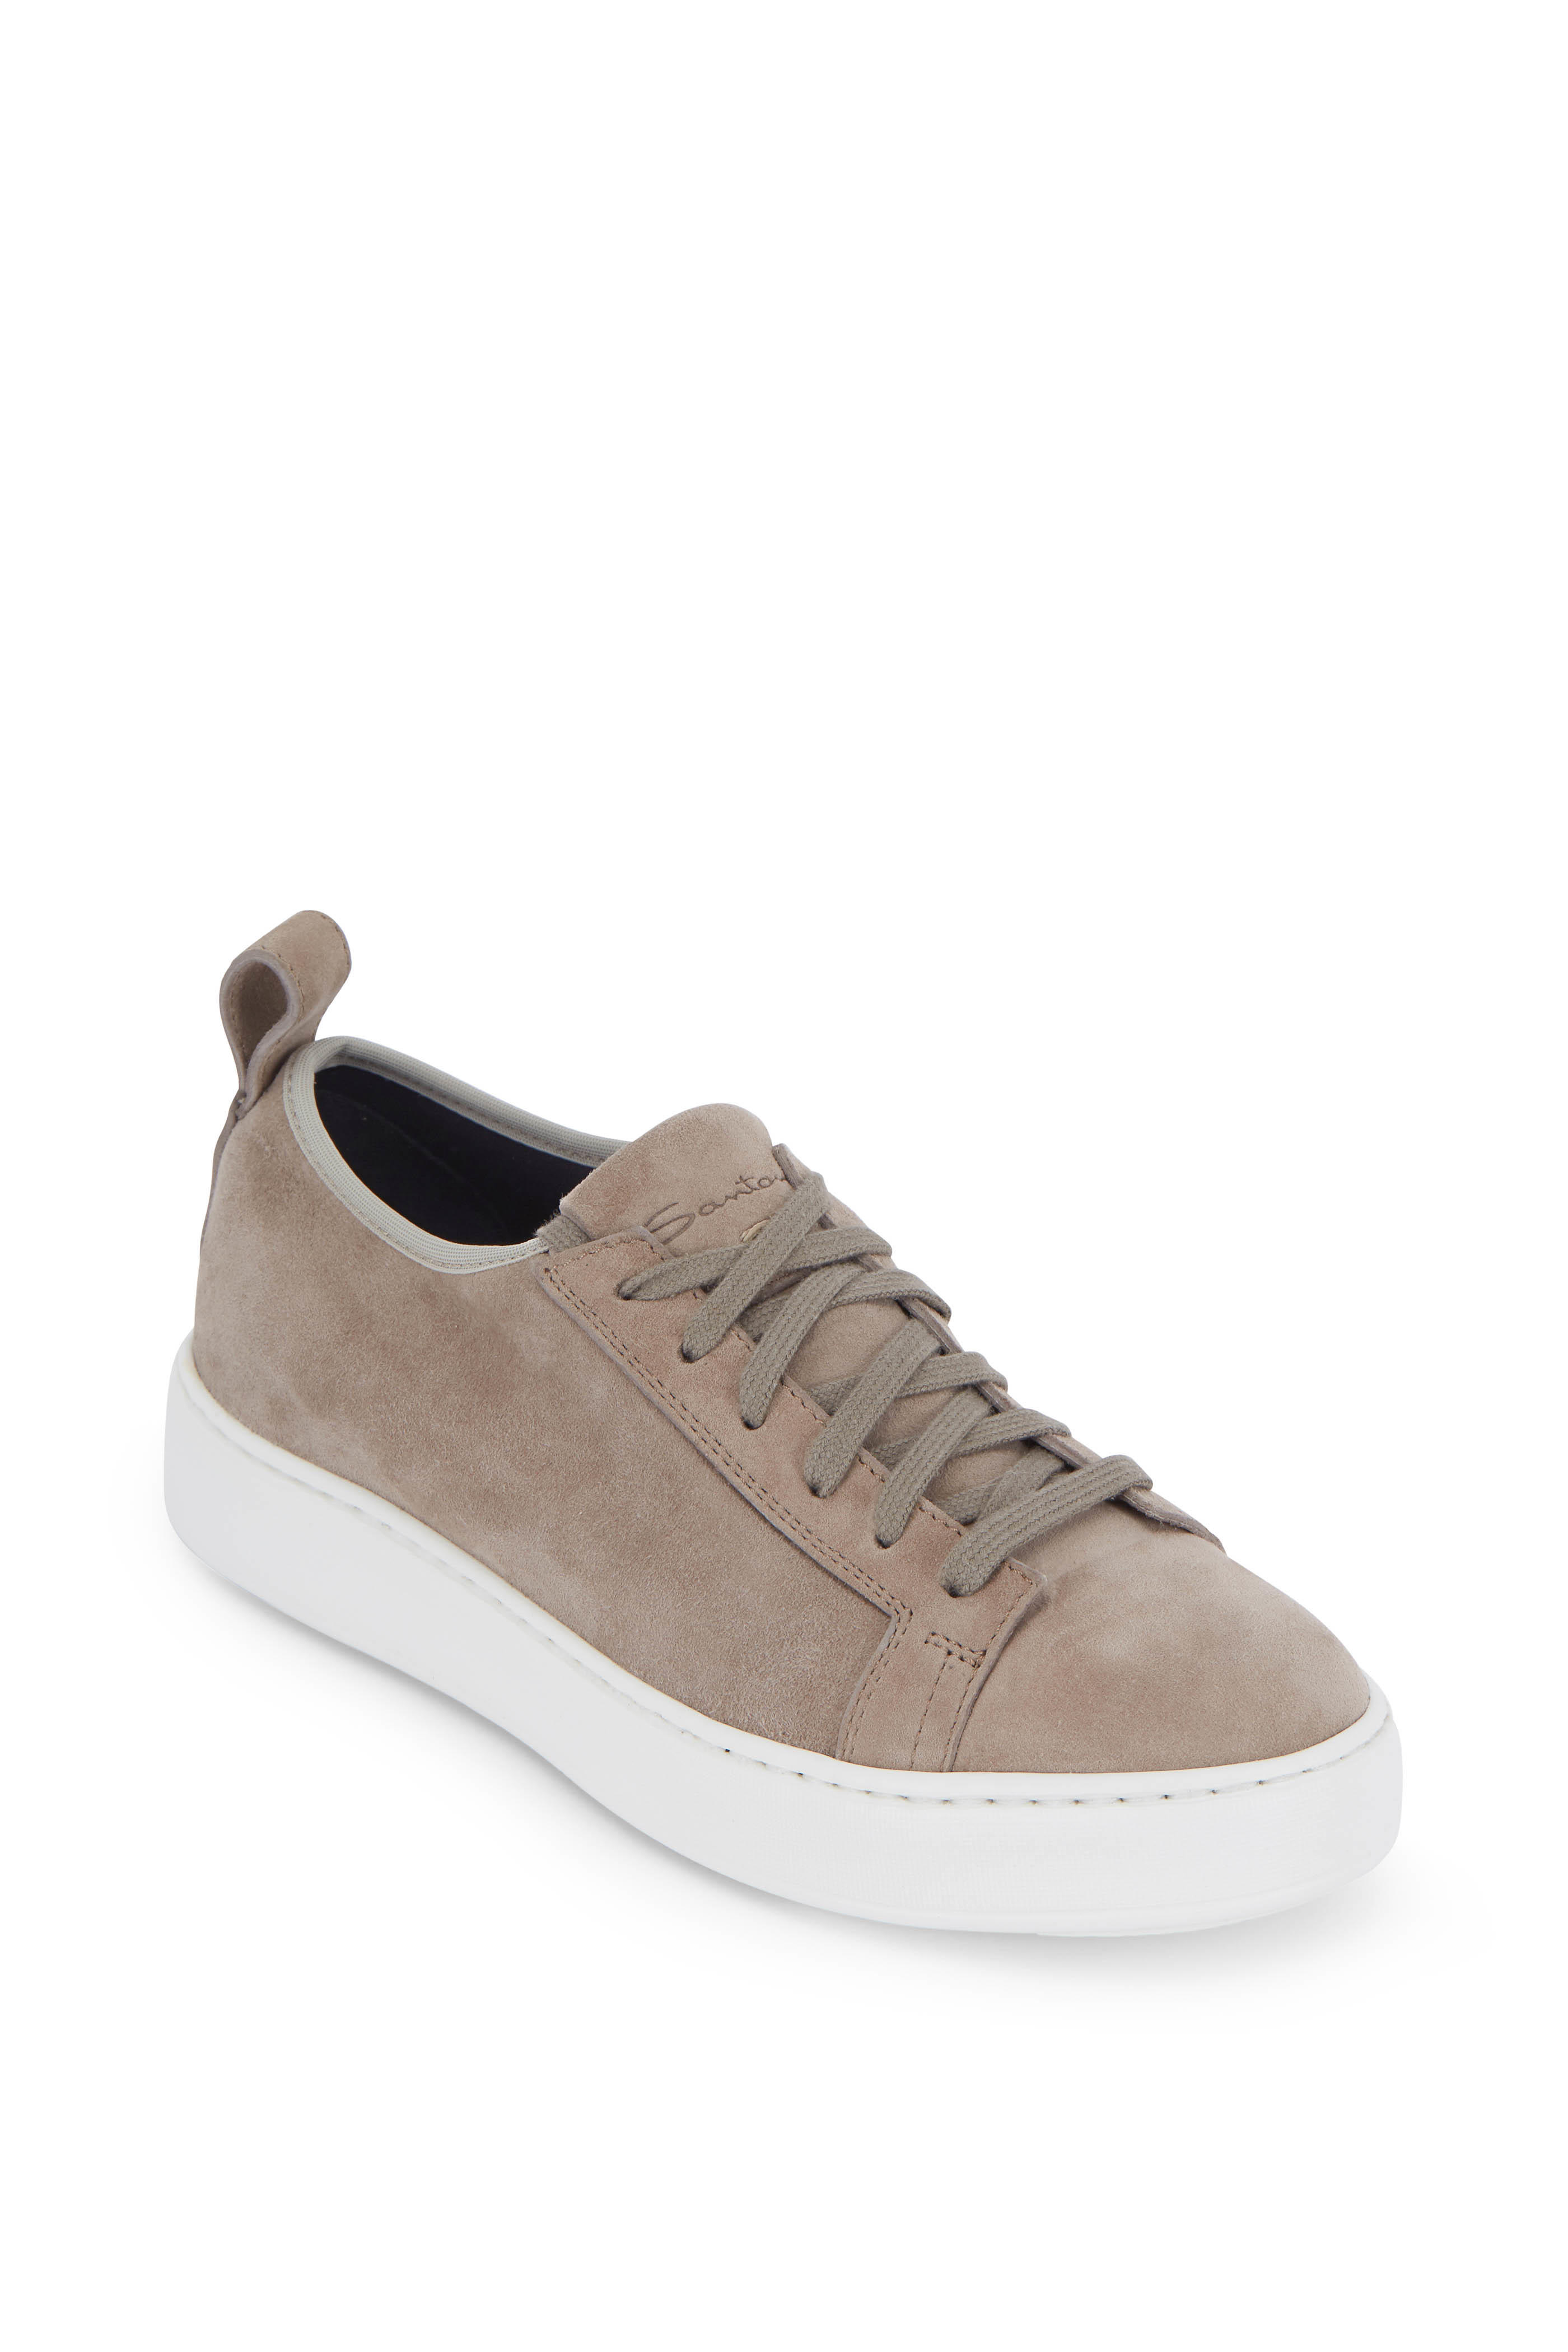 Santoni - Donna Taupe Suede Soft Lace-Up Sneaker | Mitchell Stores